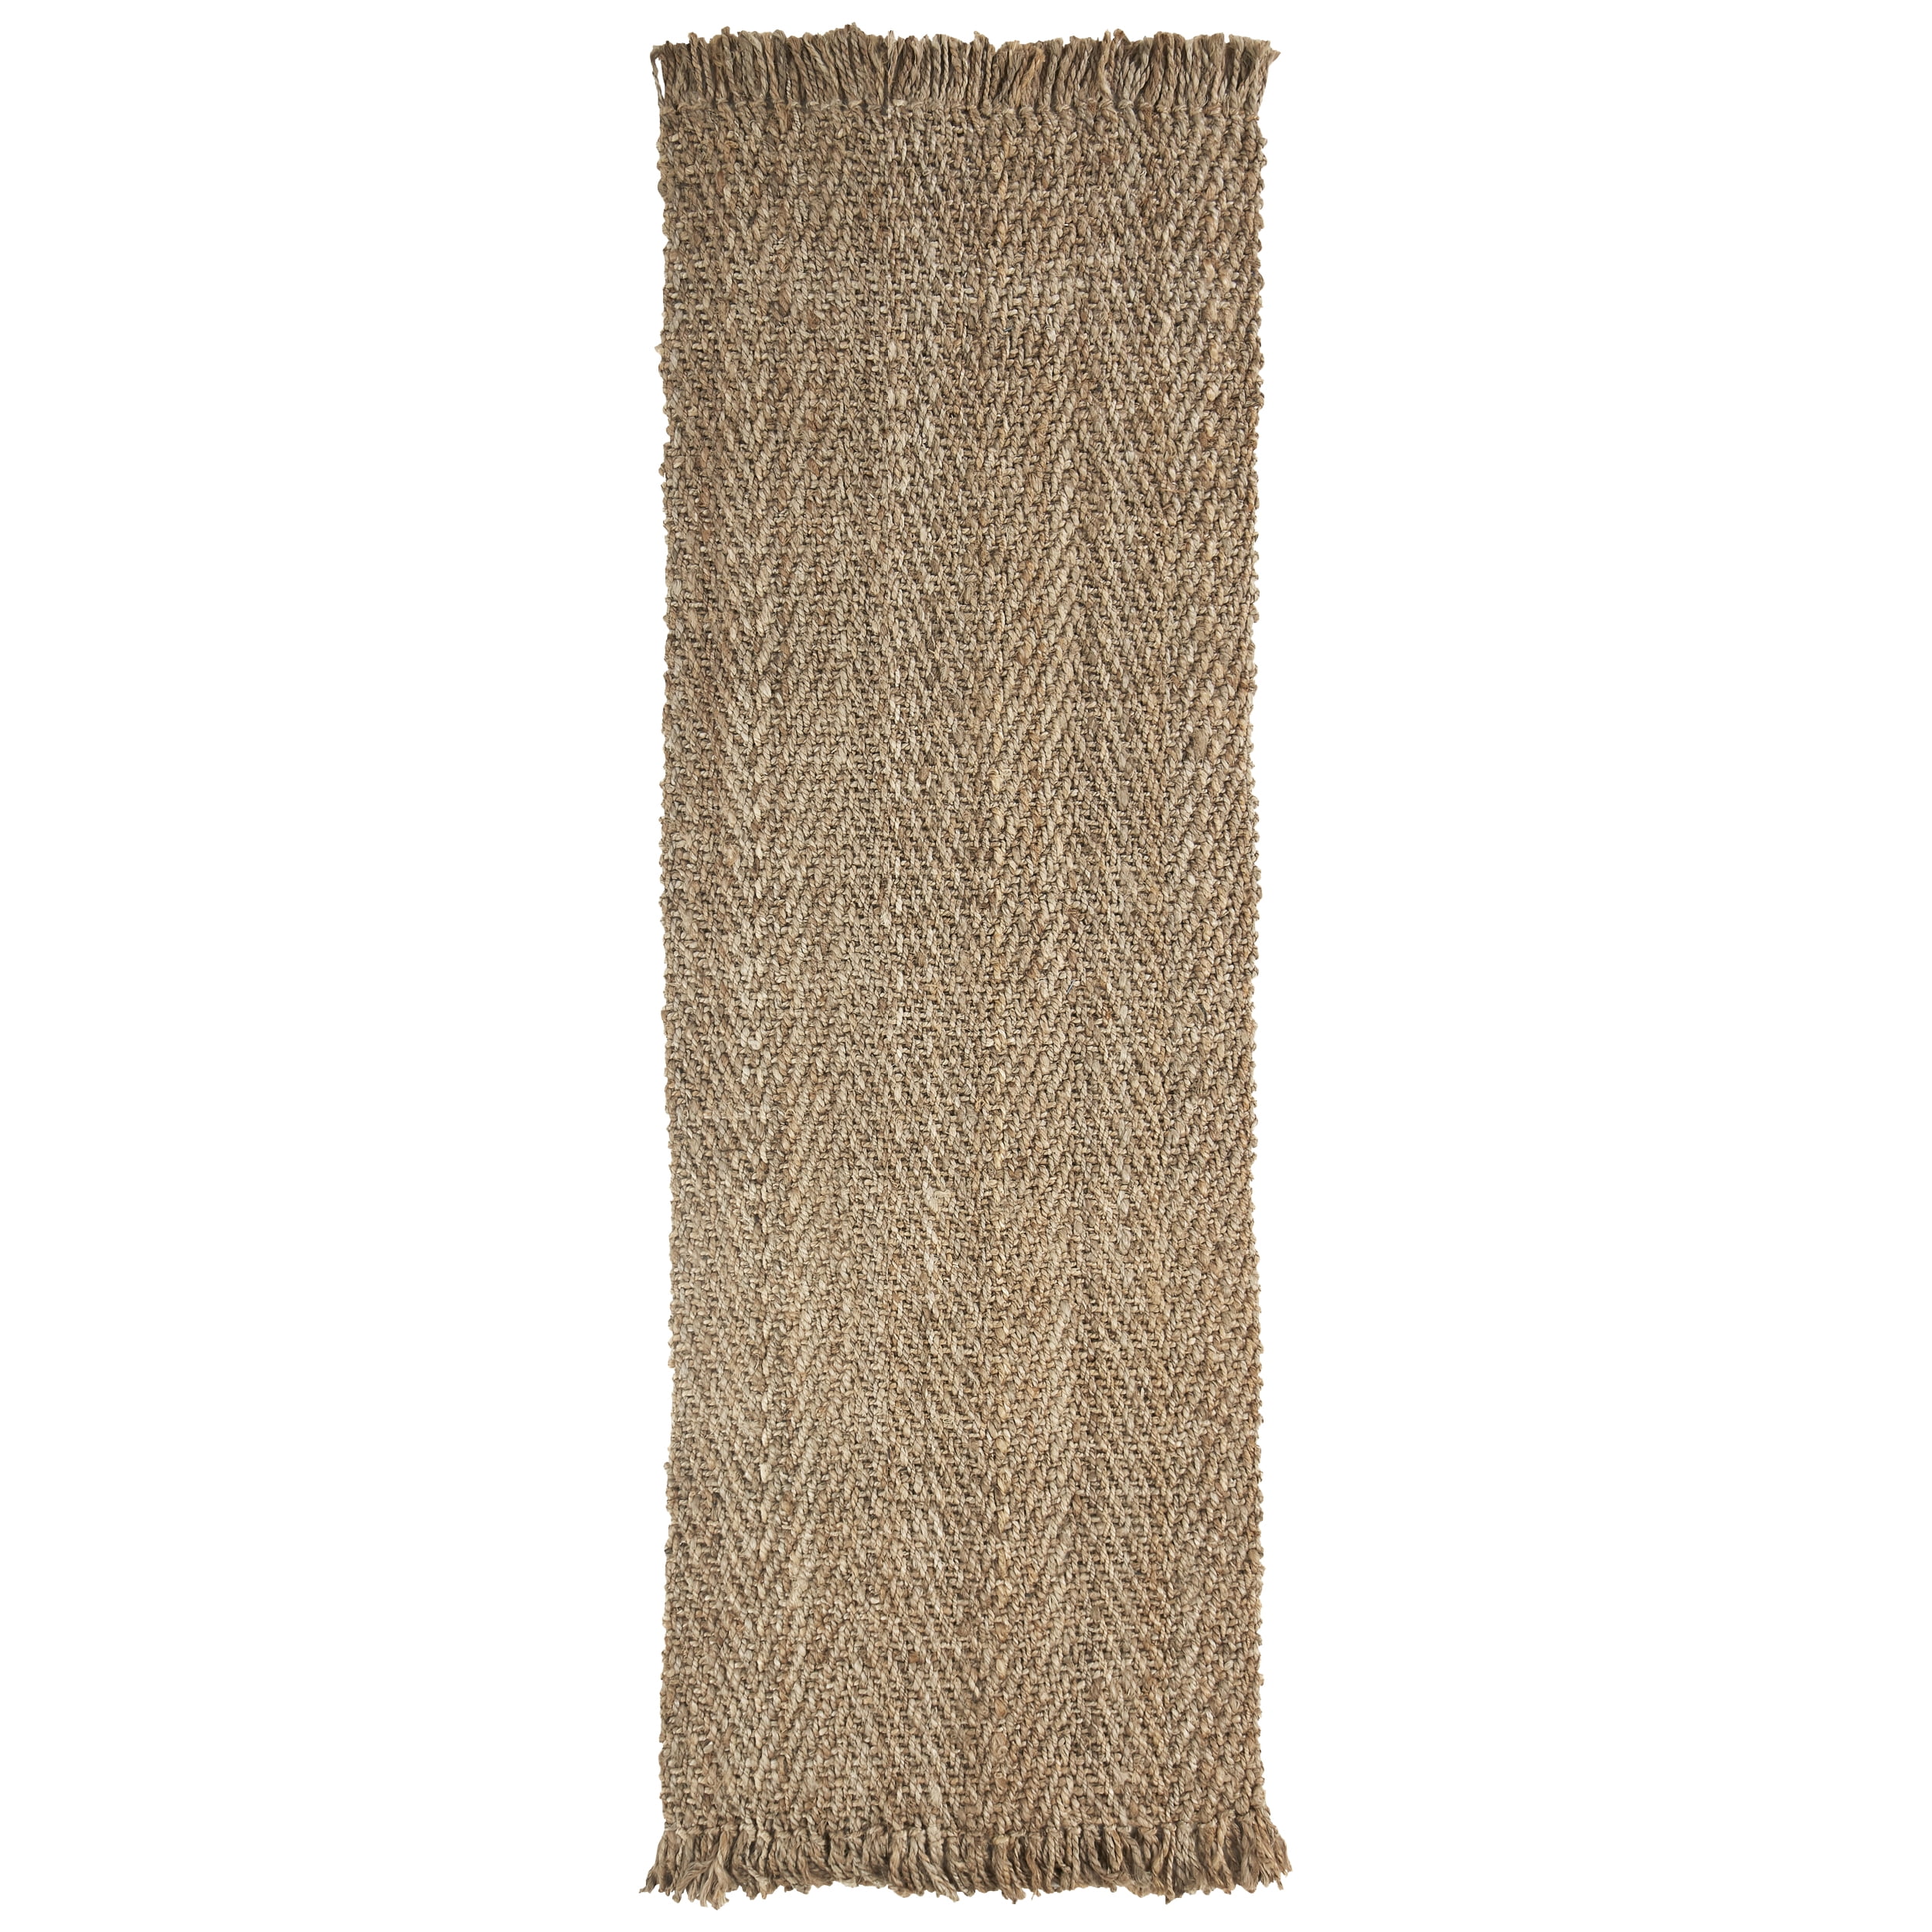 Details about   Hand-Woven Natural Jute Area Rug for Nautical & Bohemian Style Home Decor 